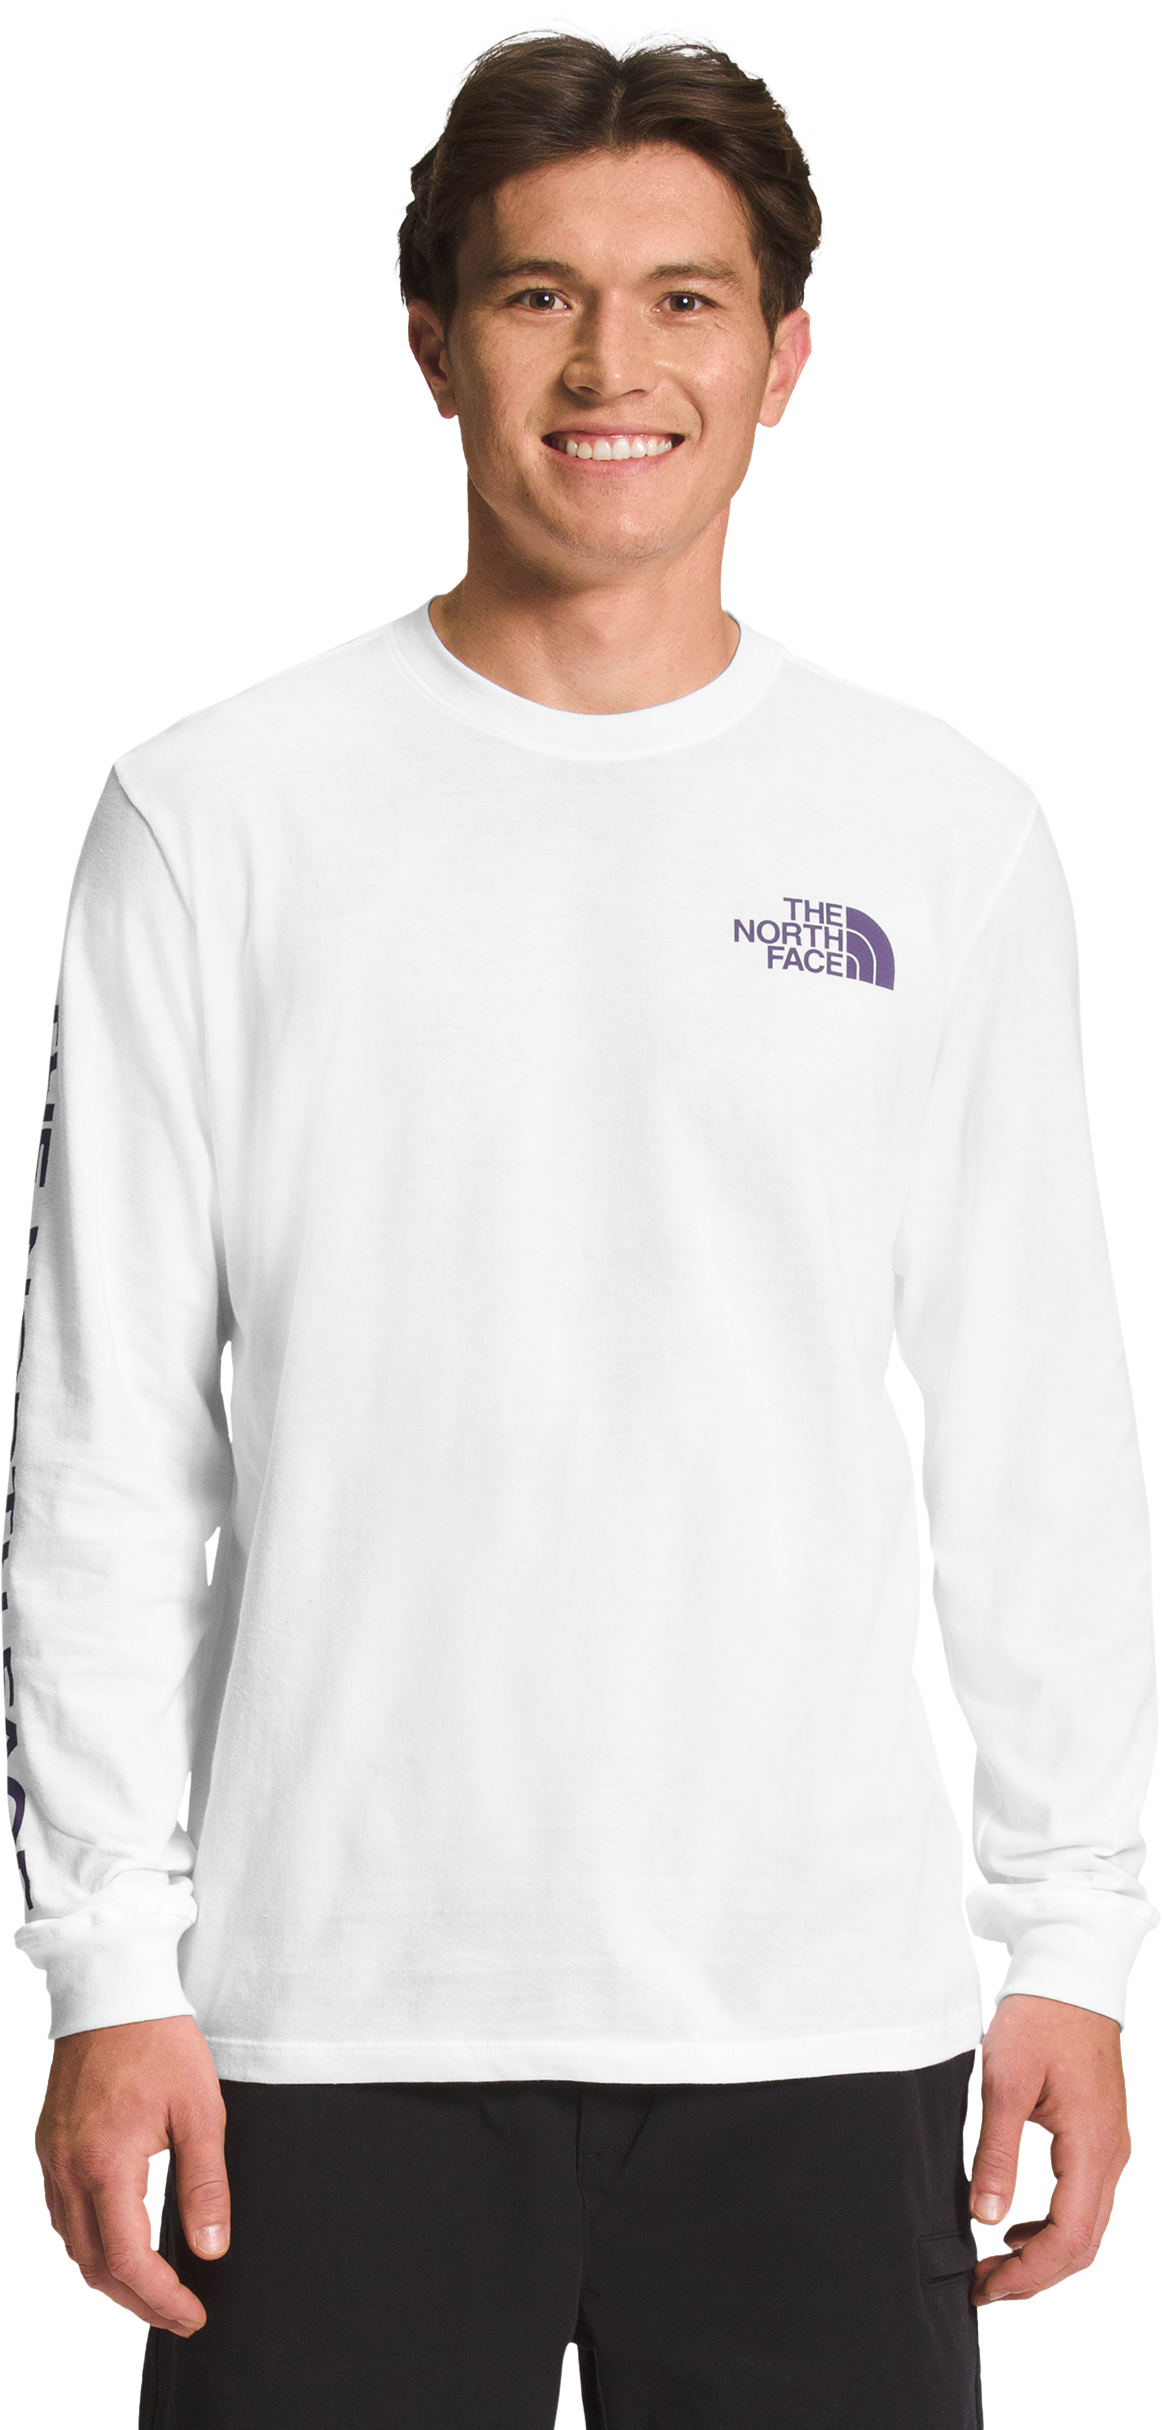 The North Face Hit Graphic Long-Sleeve T-Shirt for Men - TNF White/Lunar Slate - 2XL